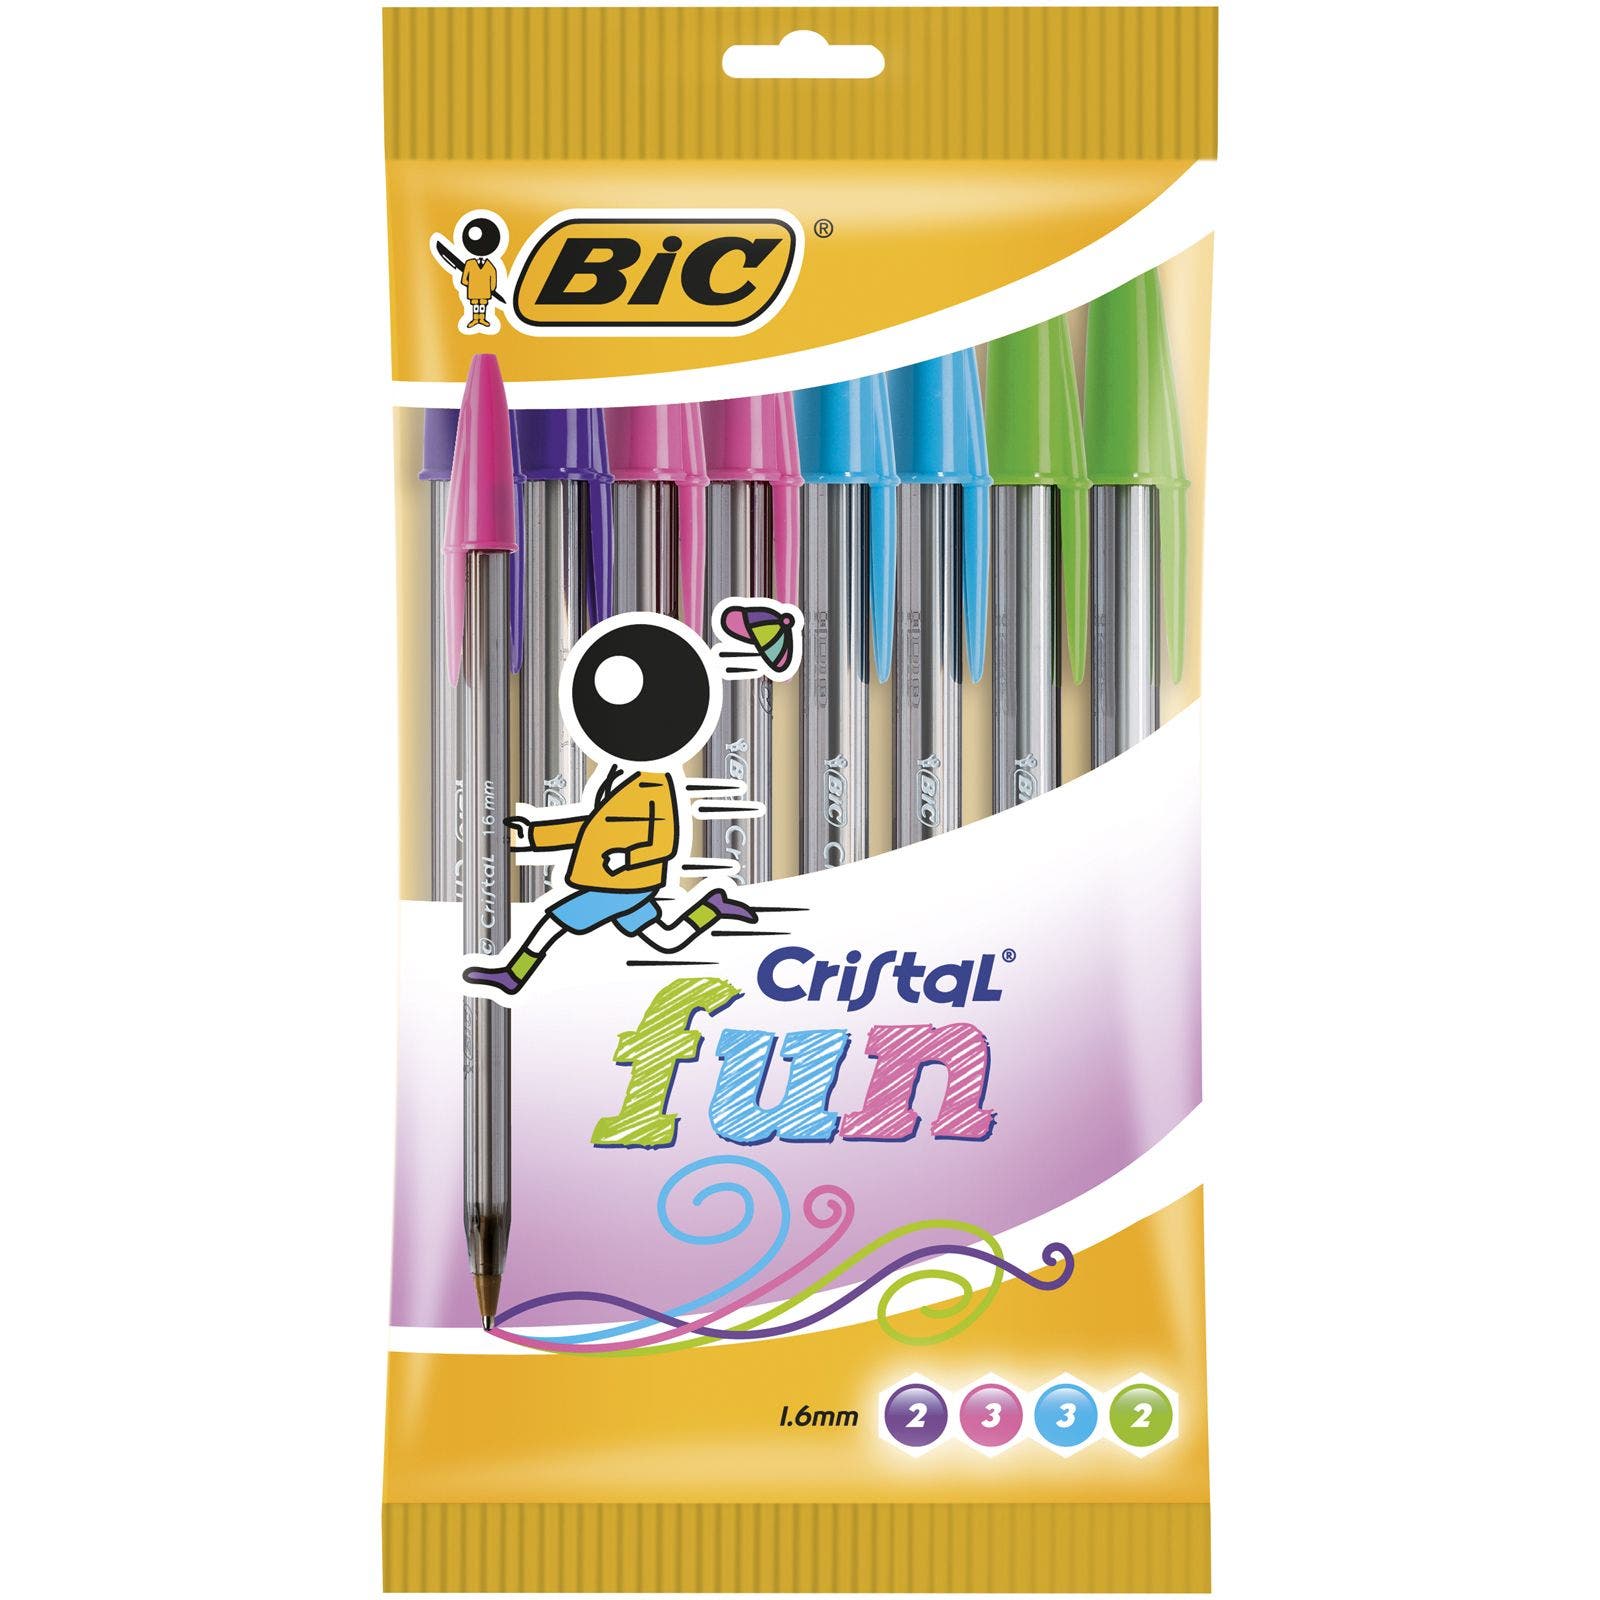 BIC Cristal Fun Ballpoint Pens Wide Point (1.6 mm) - Assorted